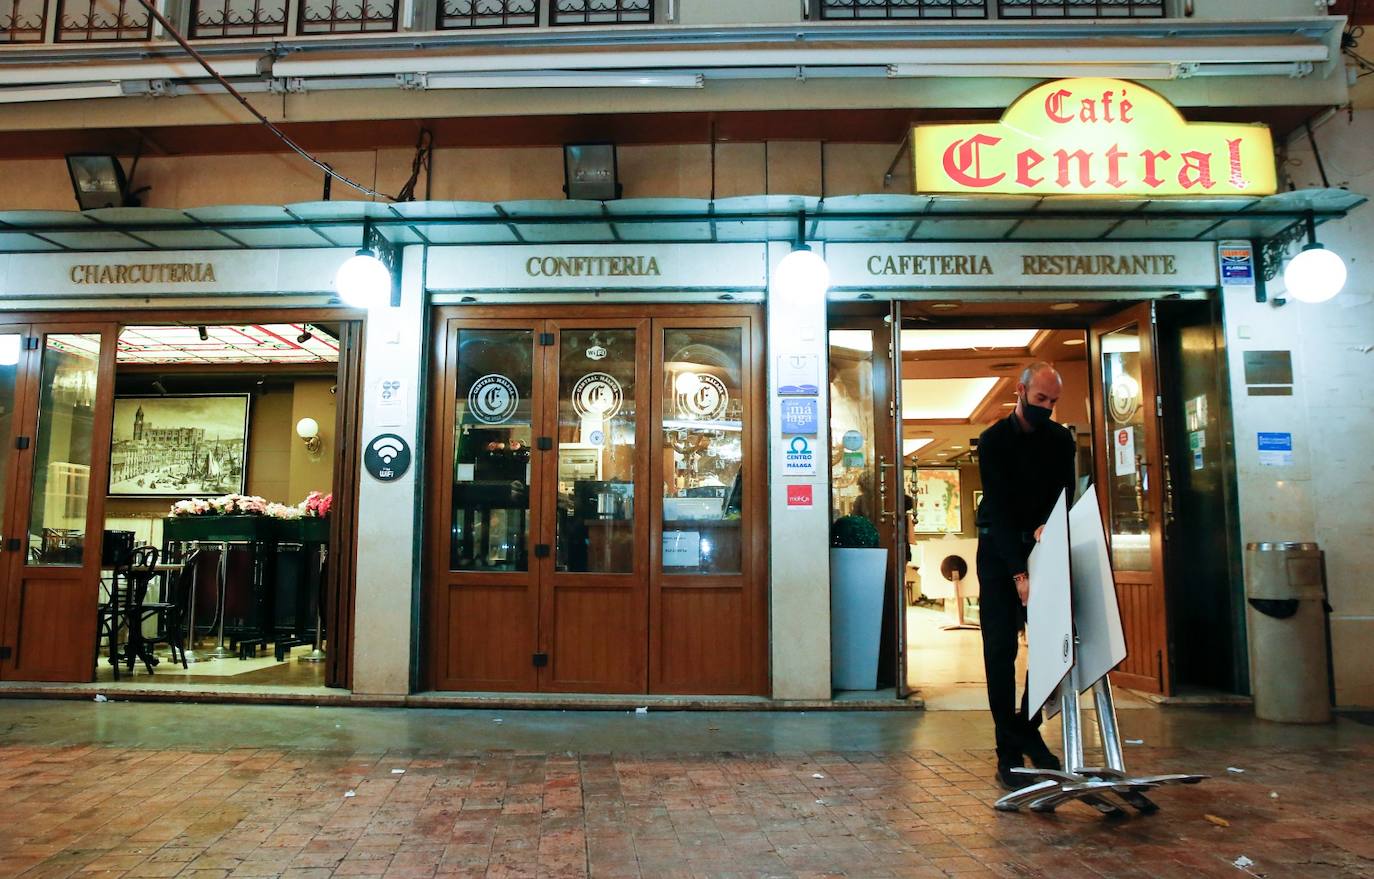 The emblematic establishment lowers its shutters for the last time after a century of trade in the city centre.